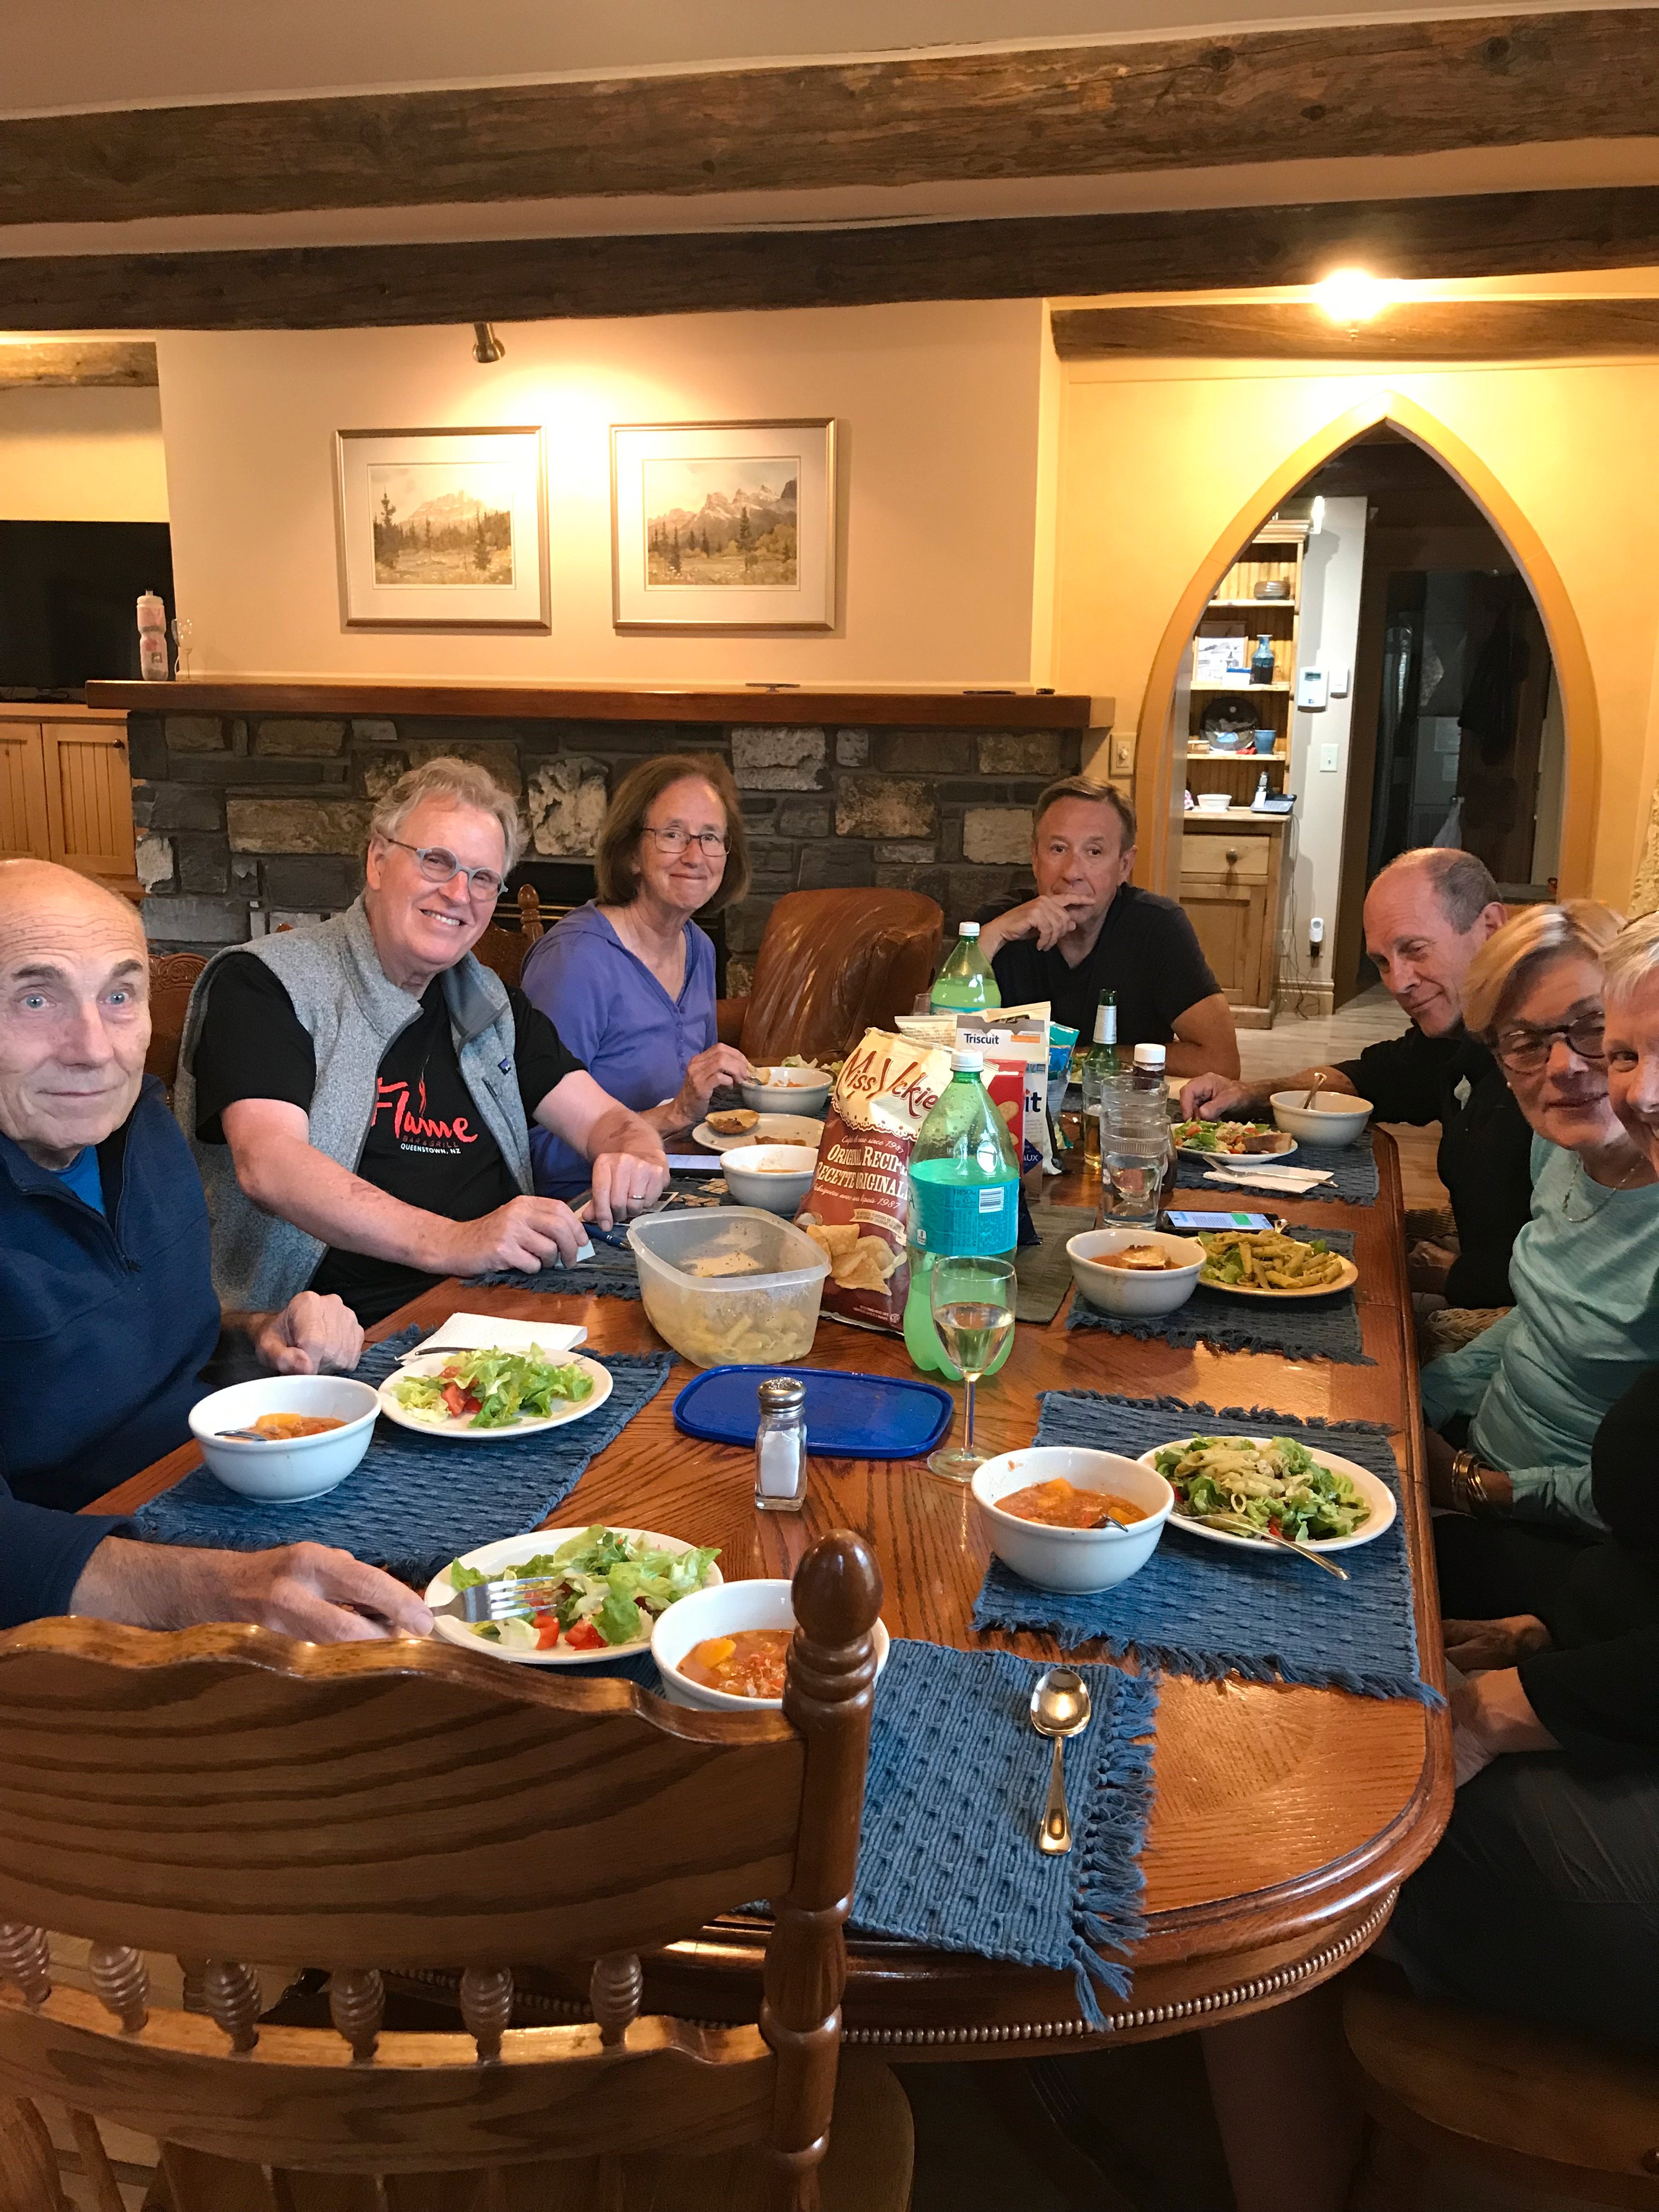 August 2019--Dinner at the house in Canmore, Alberta, Canada